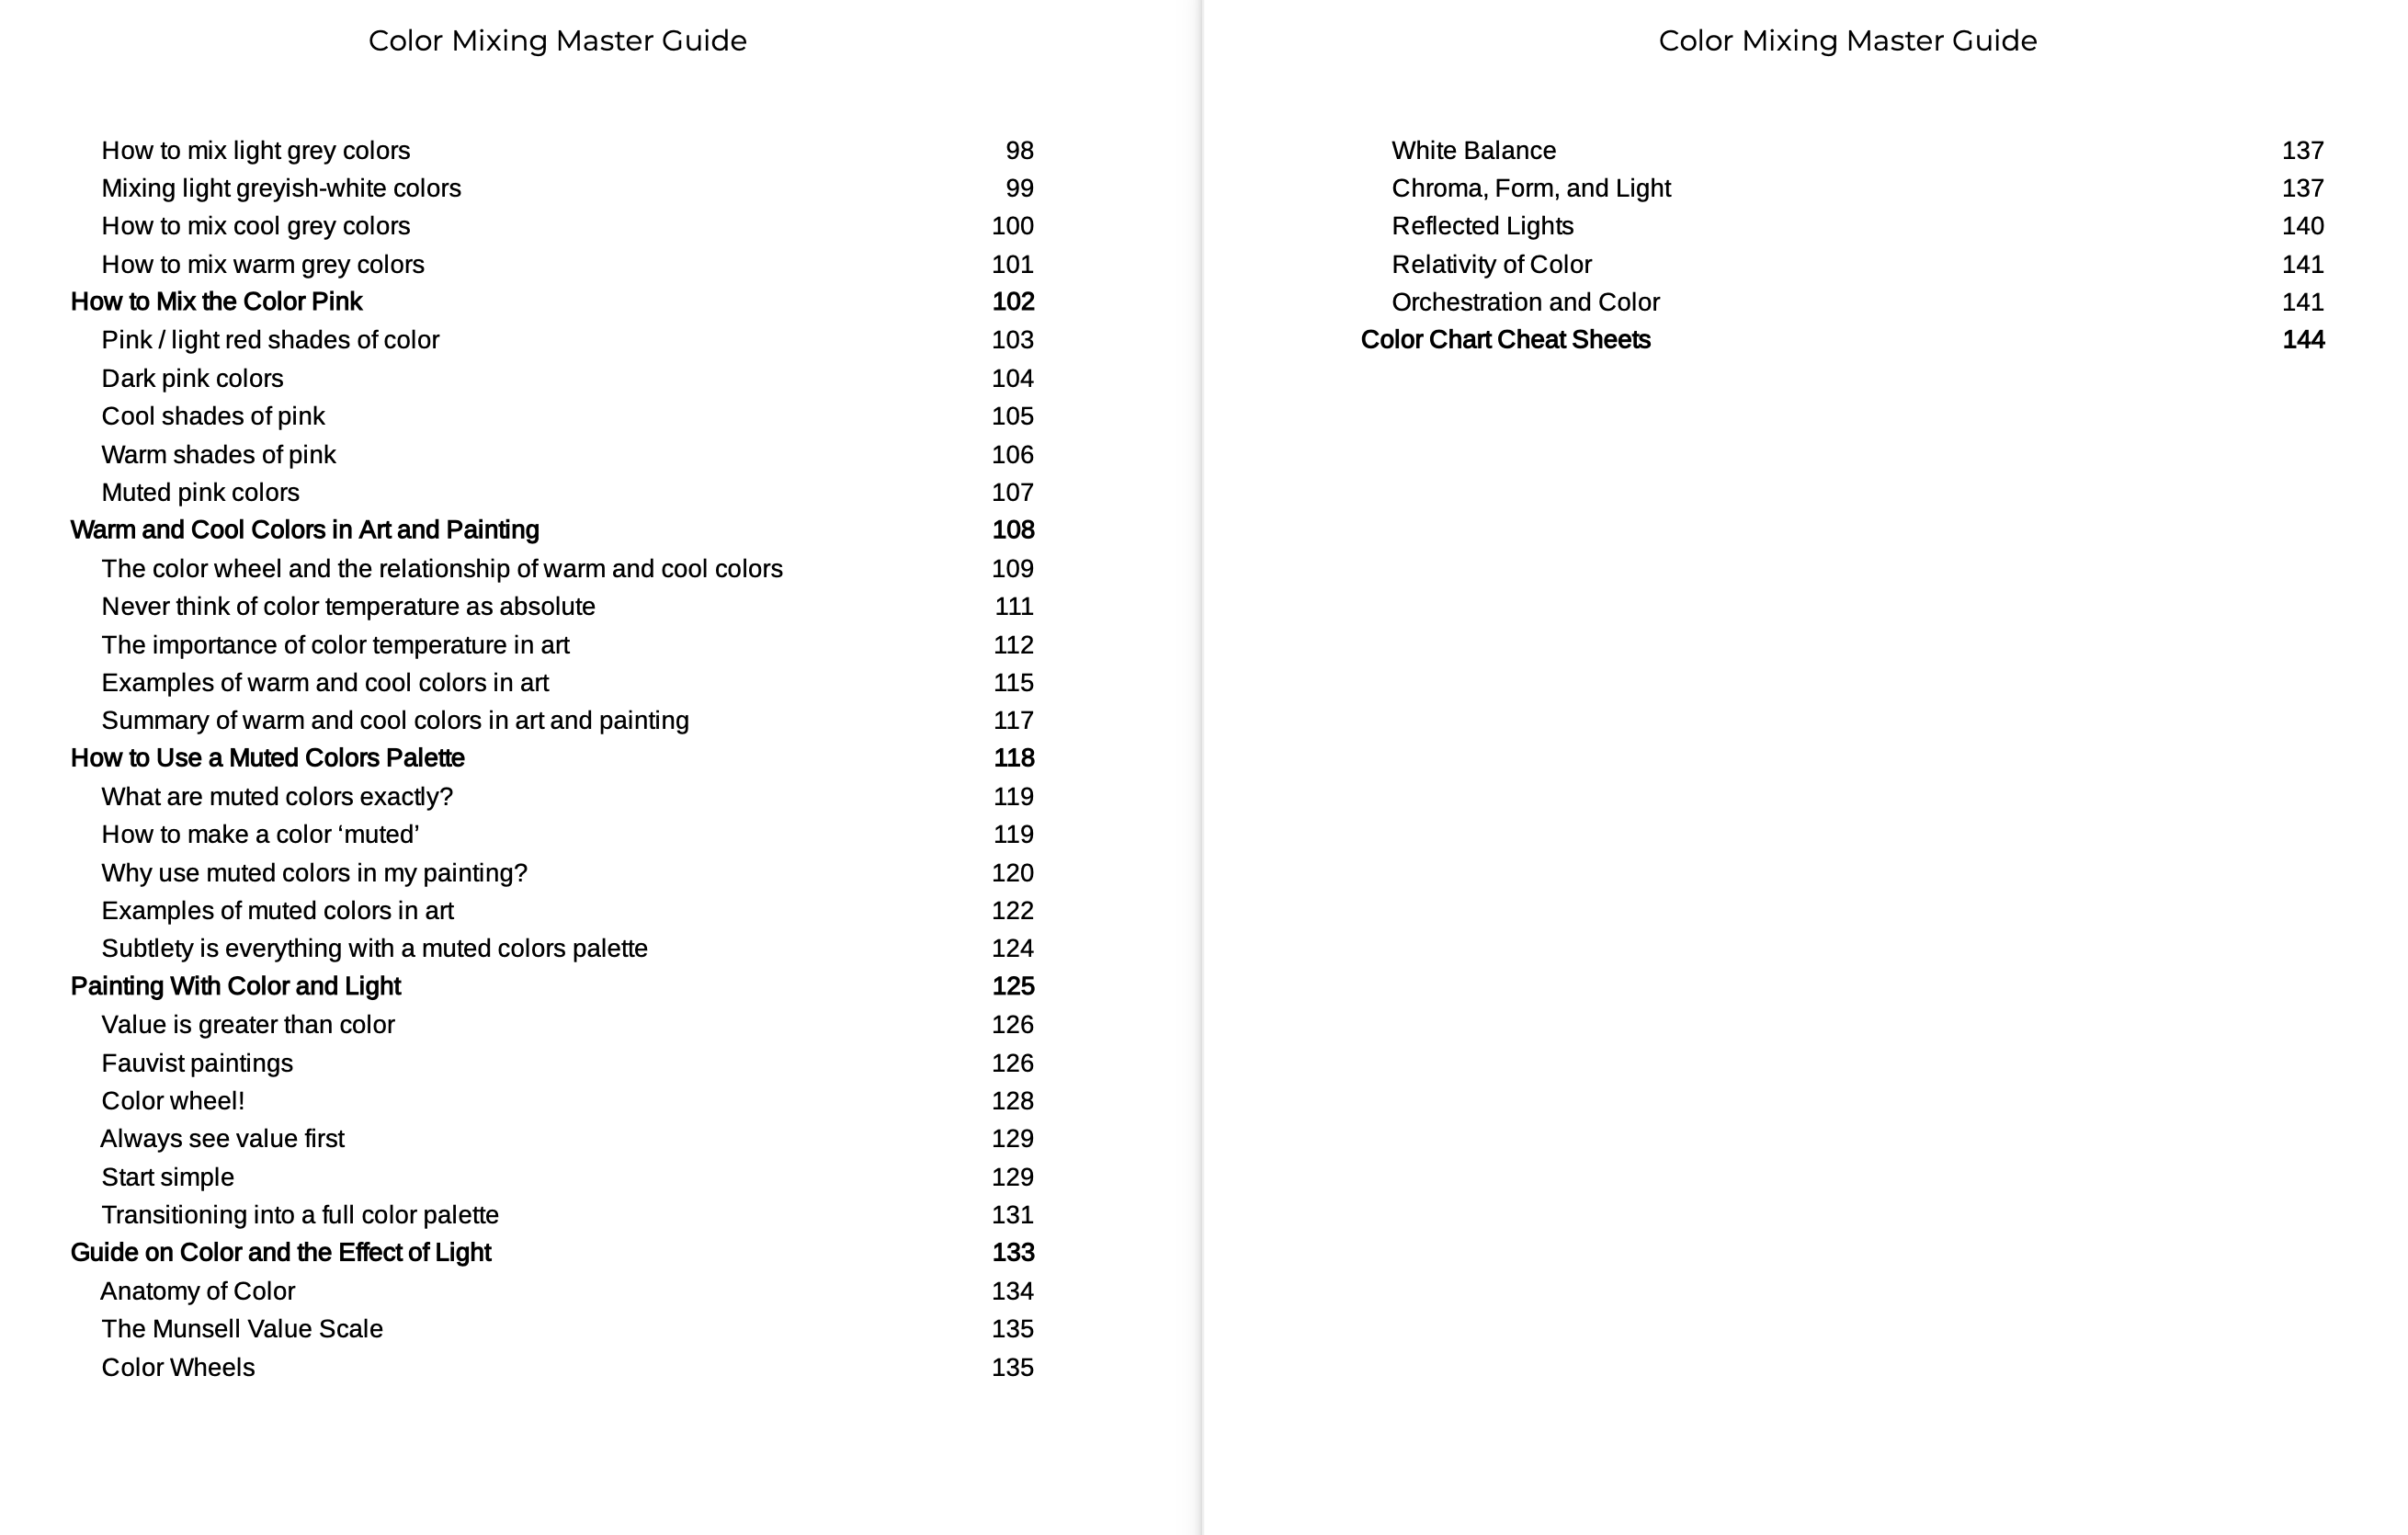 Color mixing master guide ebook table of contents continued